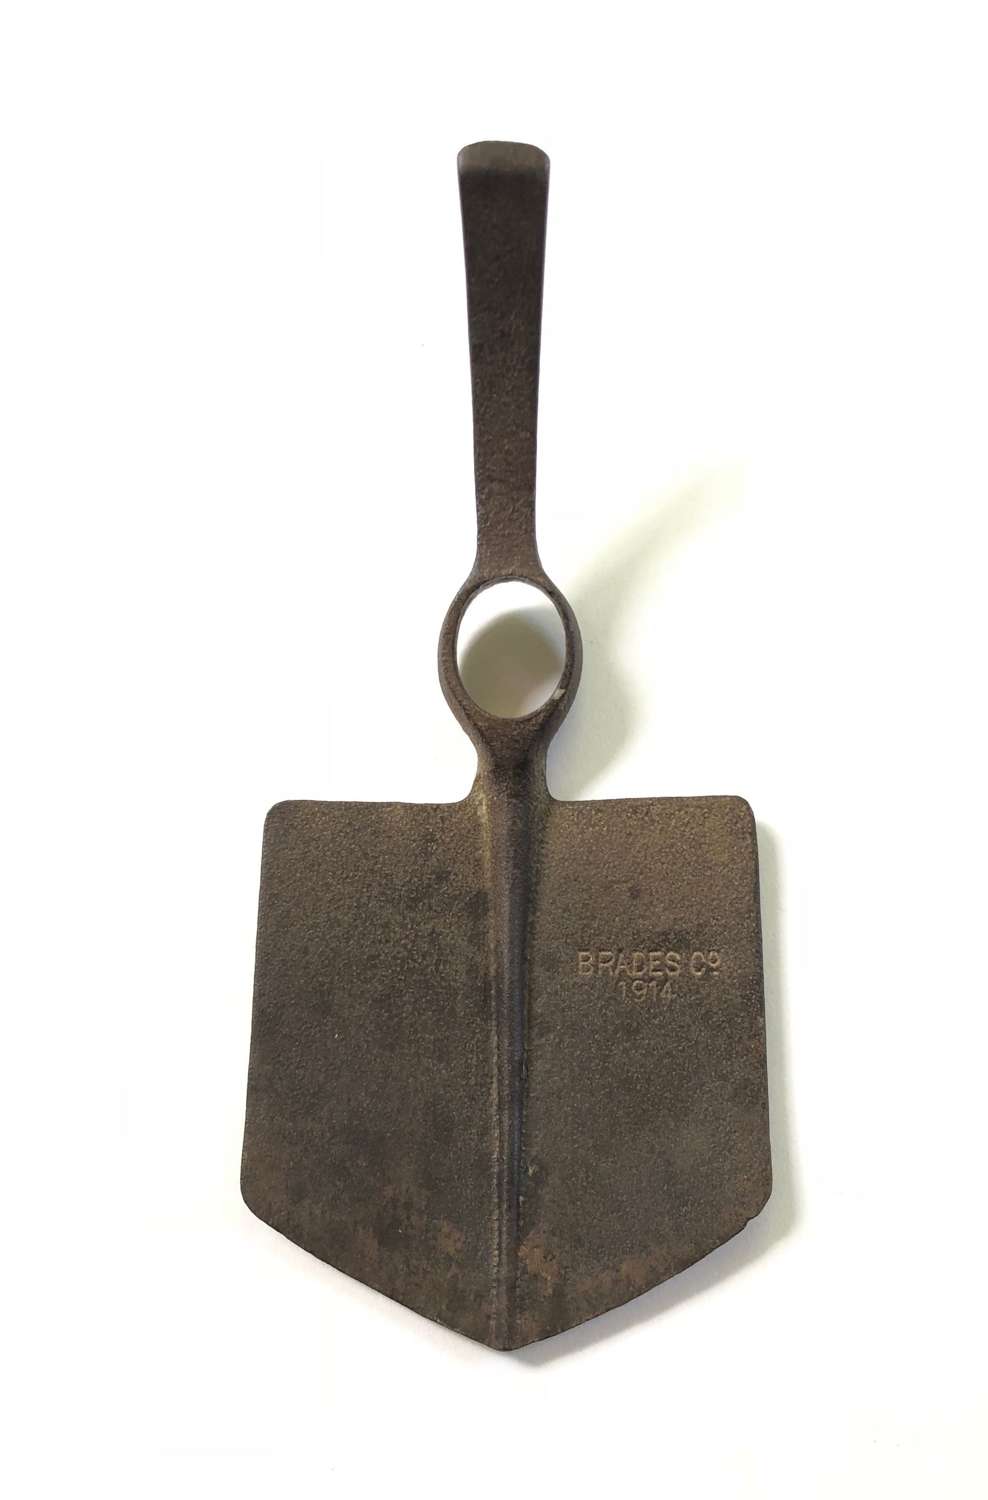 WW1 1914 Battle of Mons Period Entrenching Tool Head.